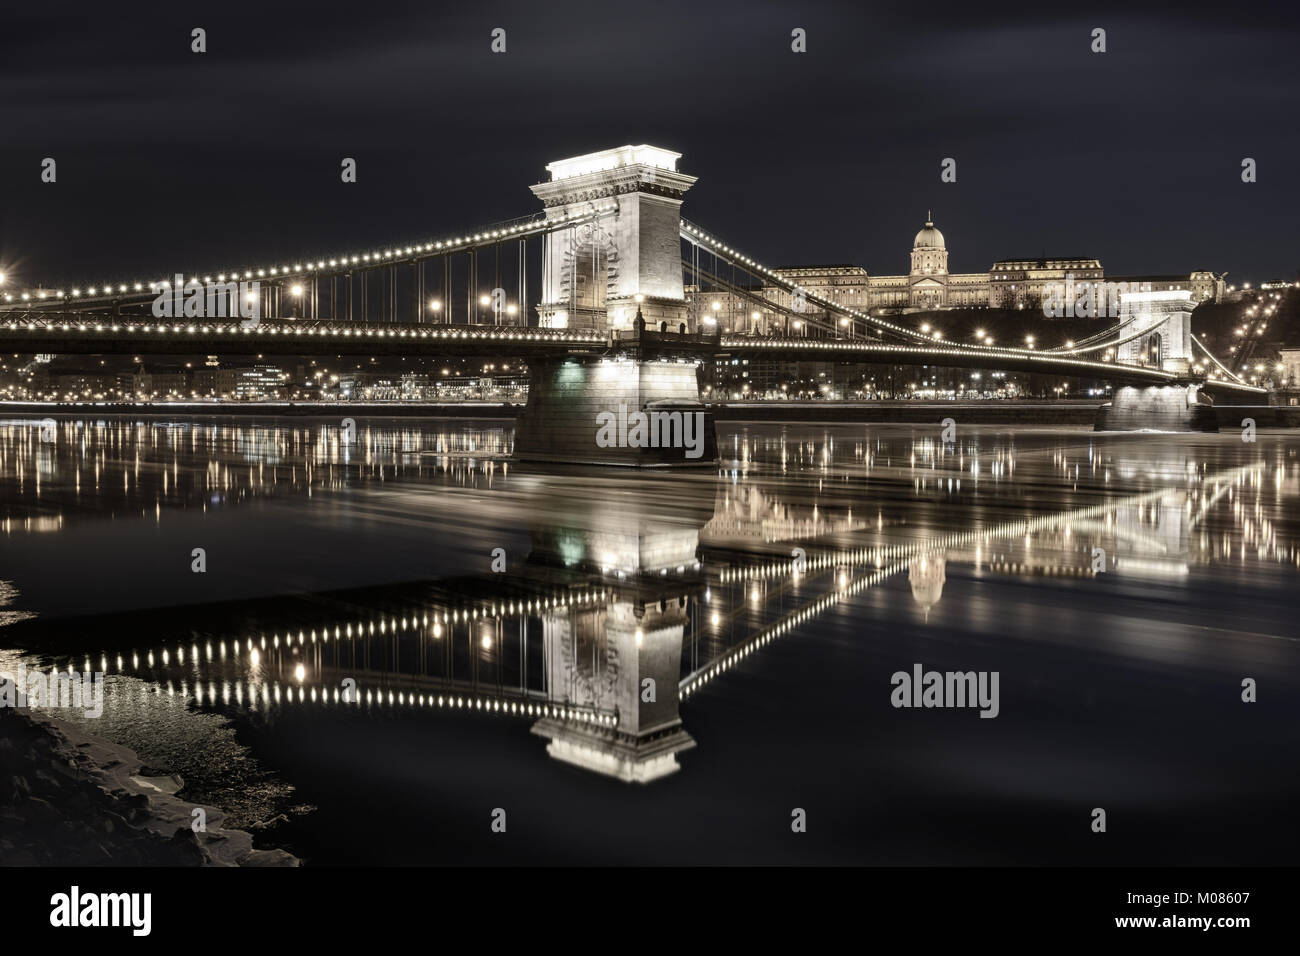 Szechenyi chain bridge against Buda Castle, moving ice floes on Danube river surface. Late night Stock Photo